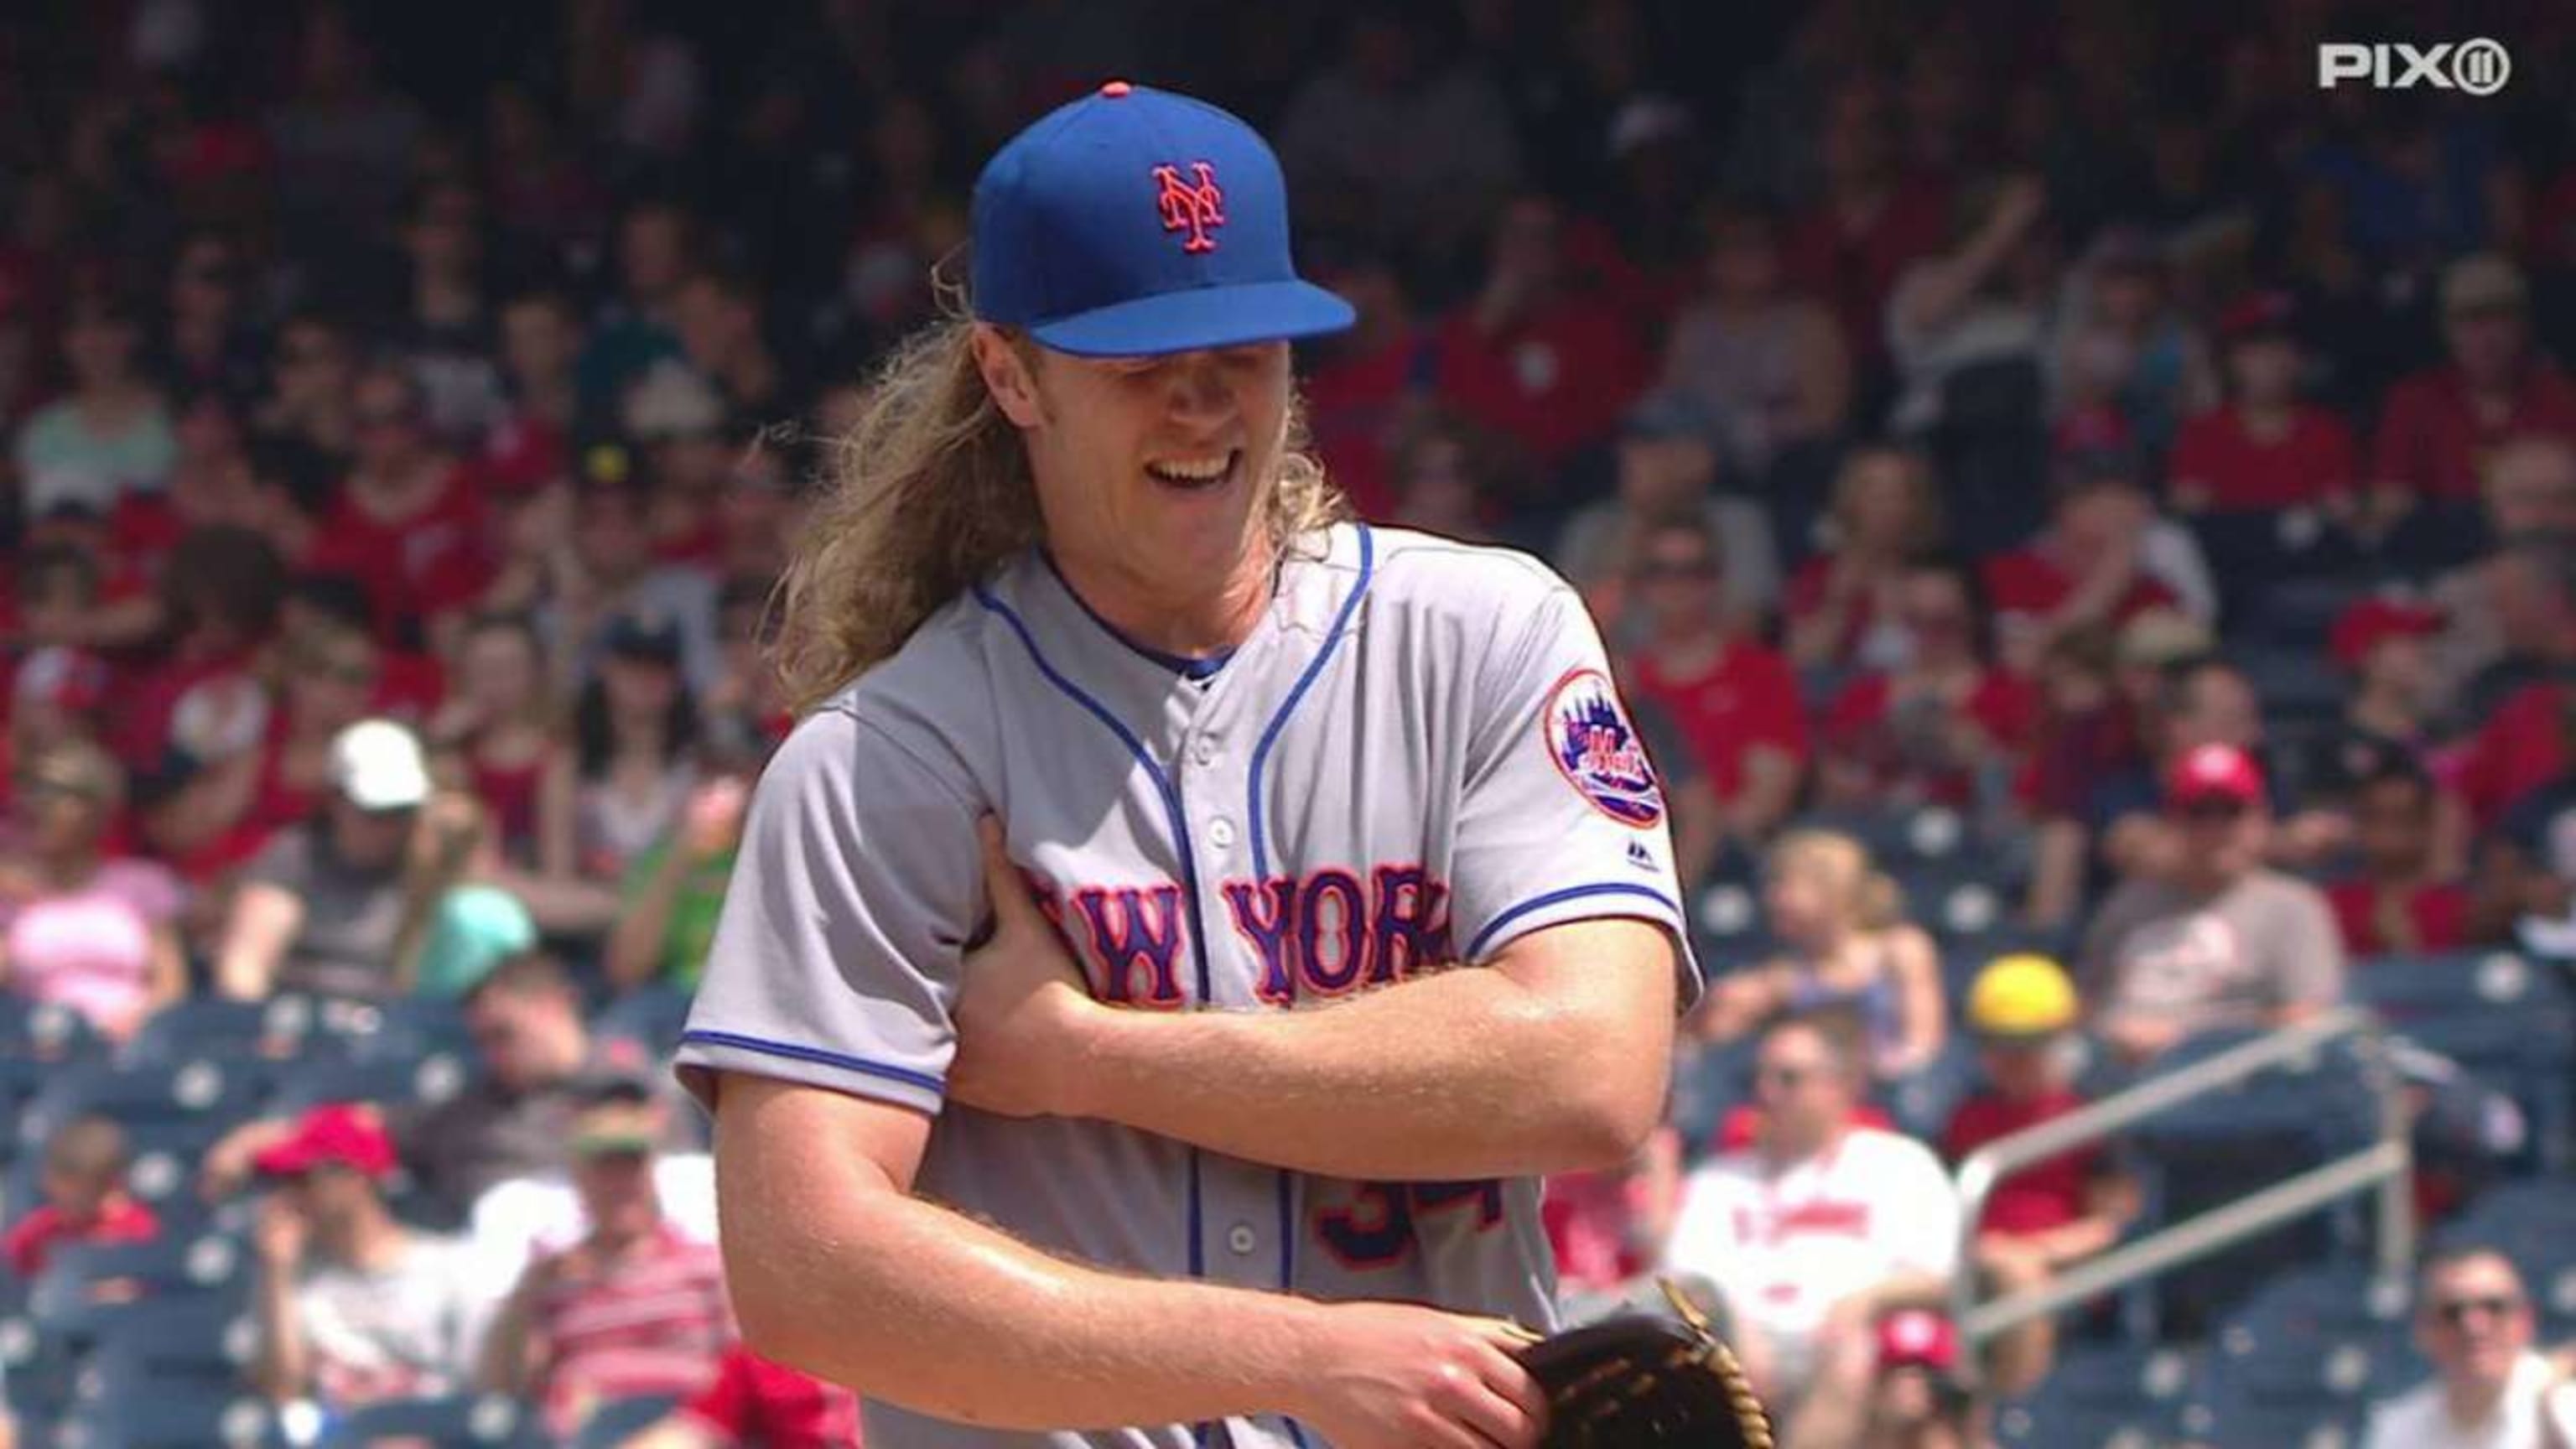 Two pitches may have led to Noah Syndergaard's elbow issues